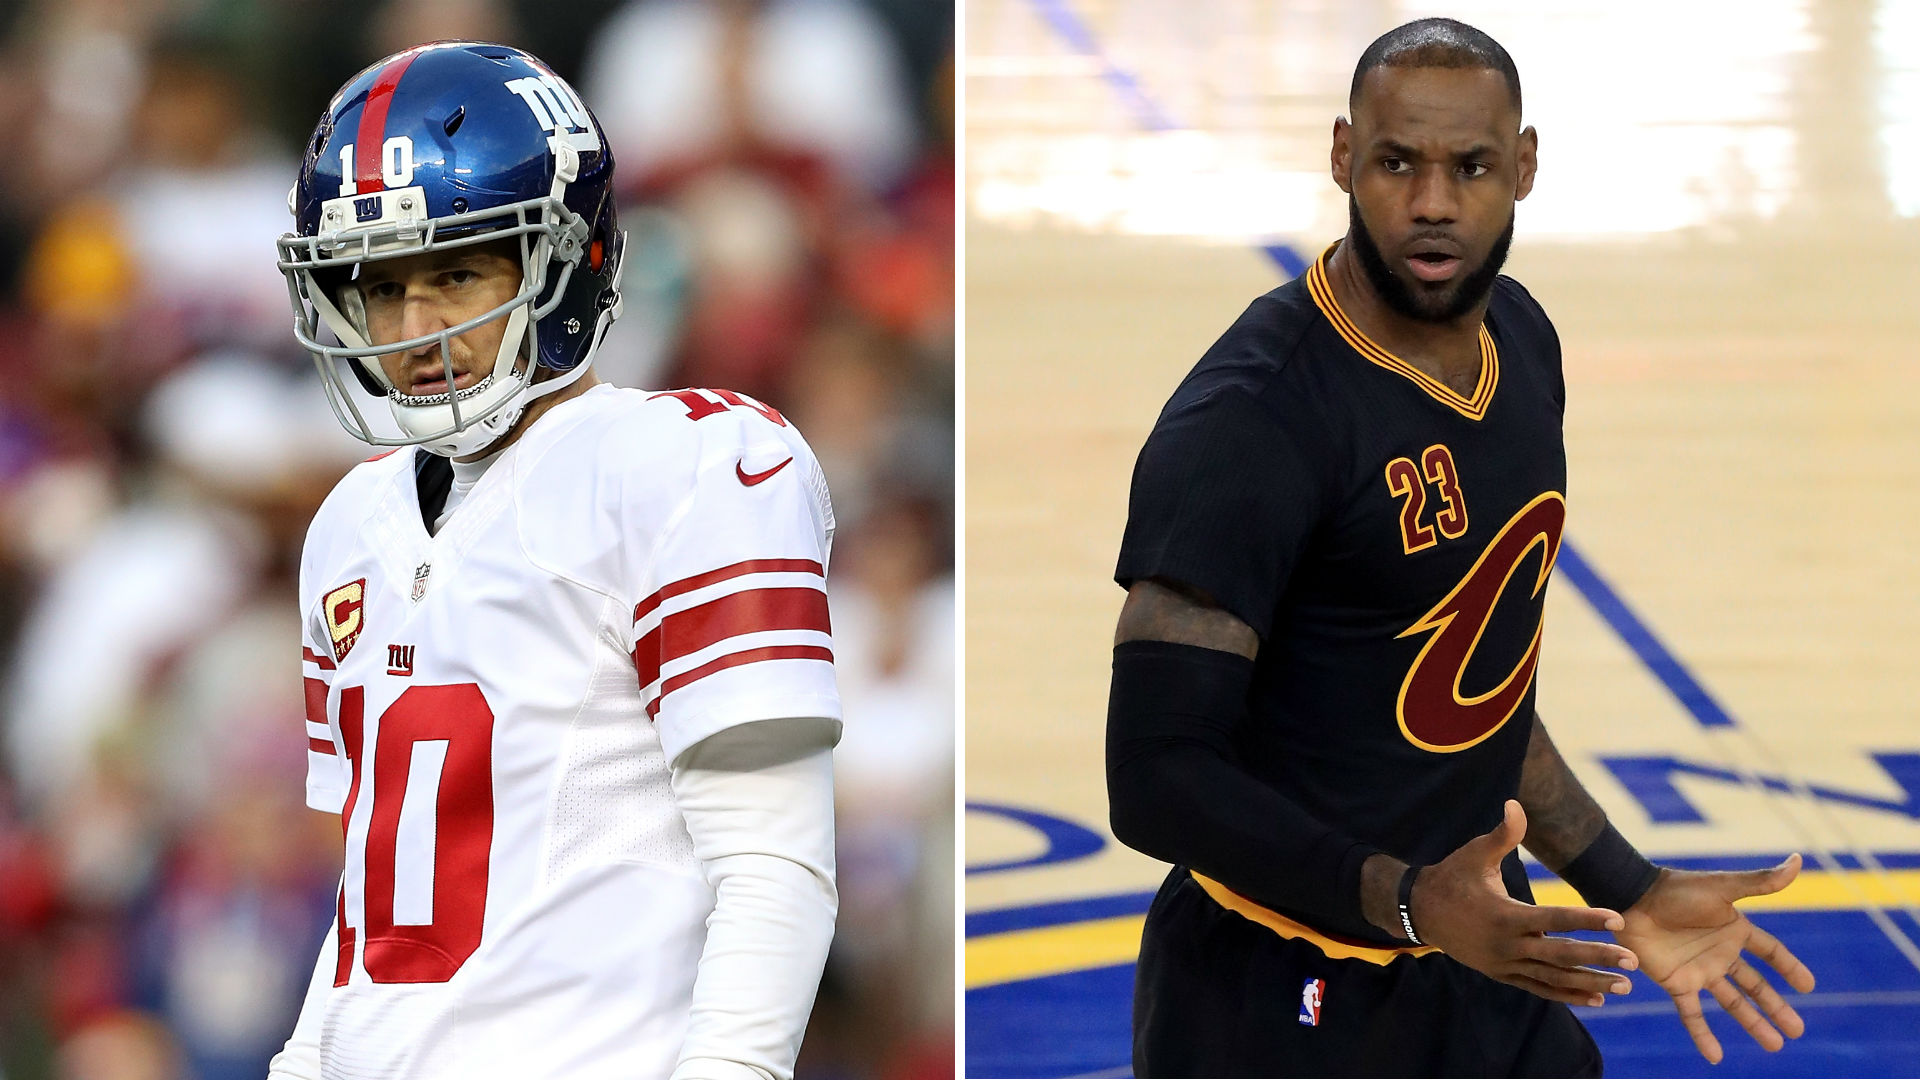 Giants teammate explains why Eli Manning is similar to LeBron James | Sporting News Canada1920 x 1080